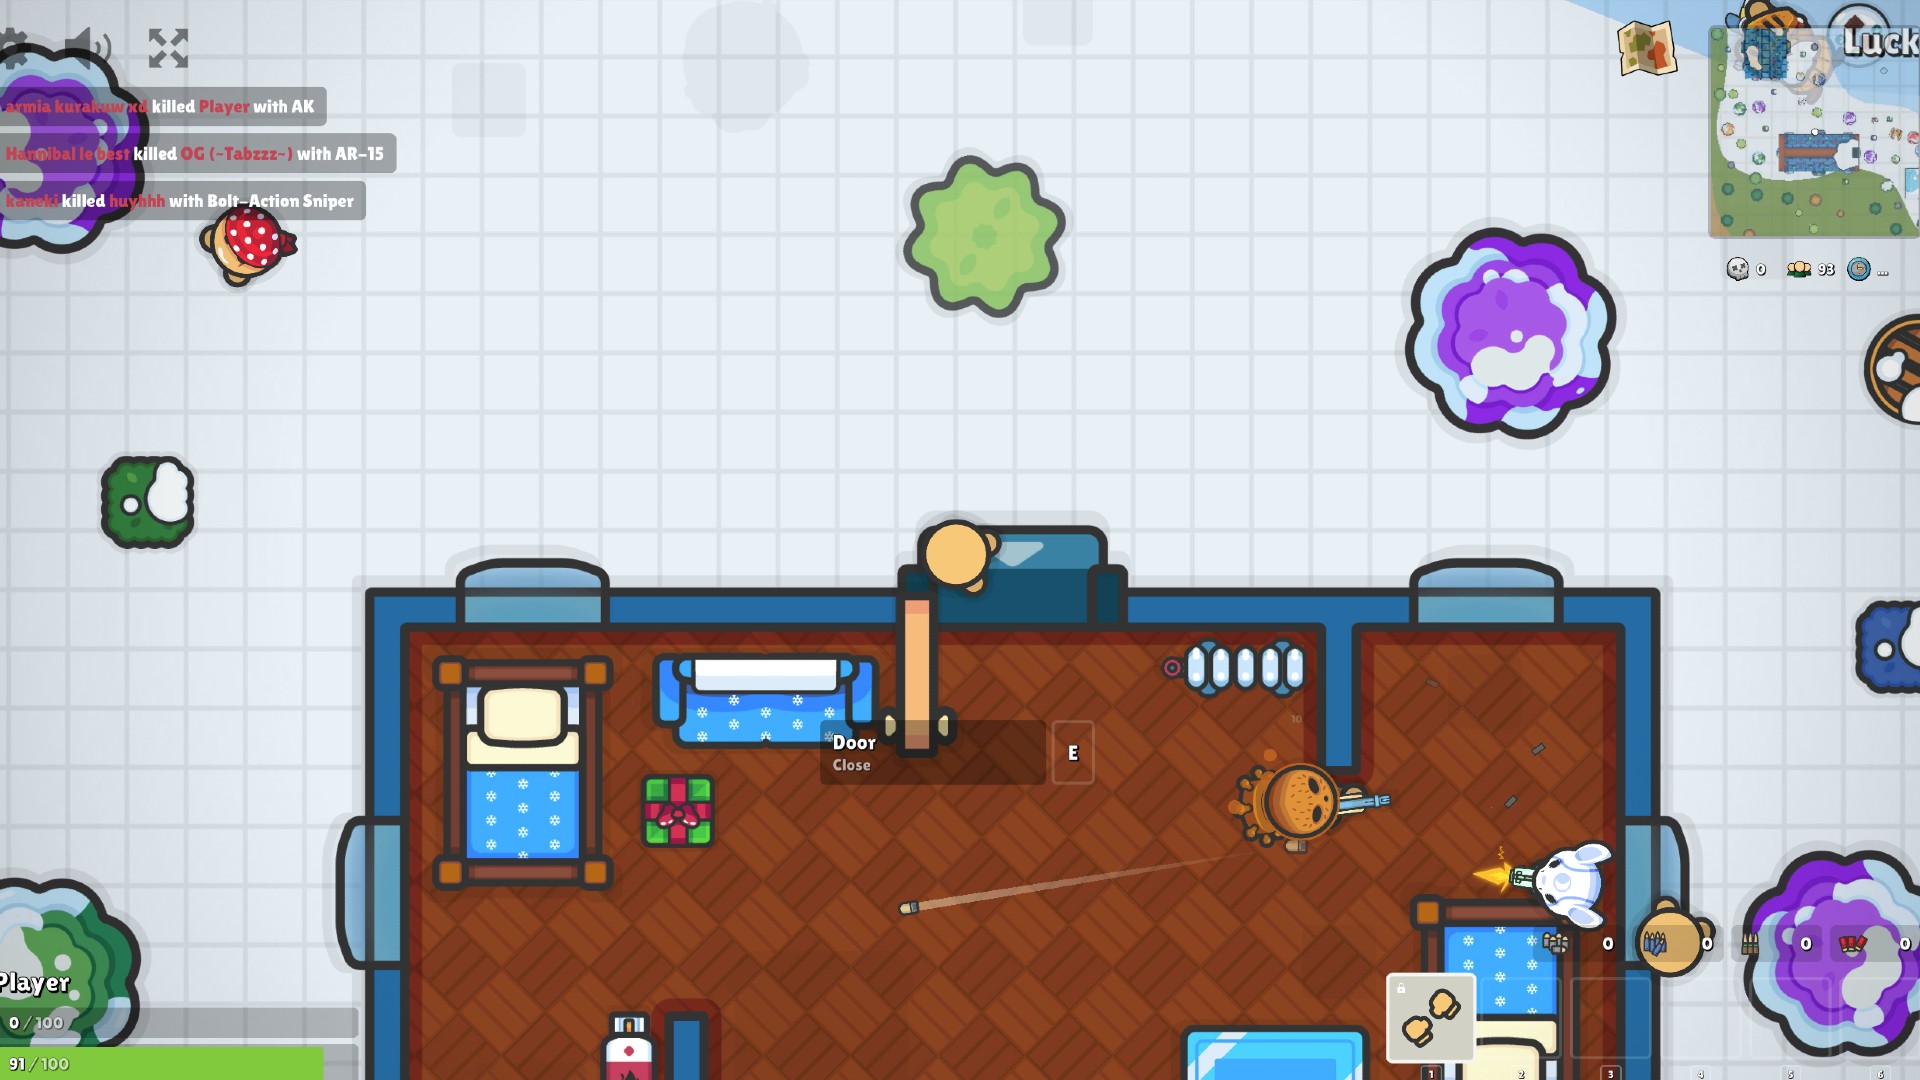 Online games: Zombs Royale. Image shows a top down view of a house with various characters and zombies running about the place.